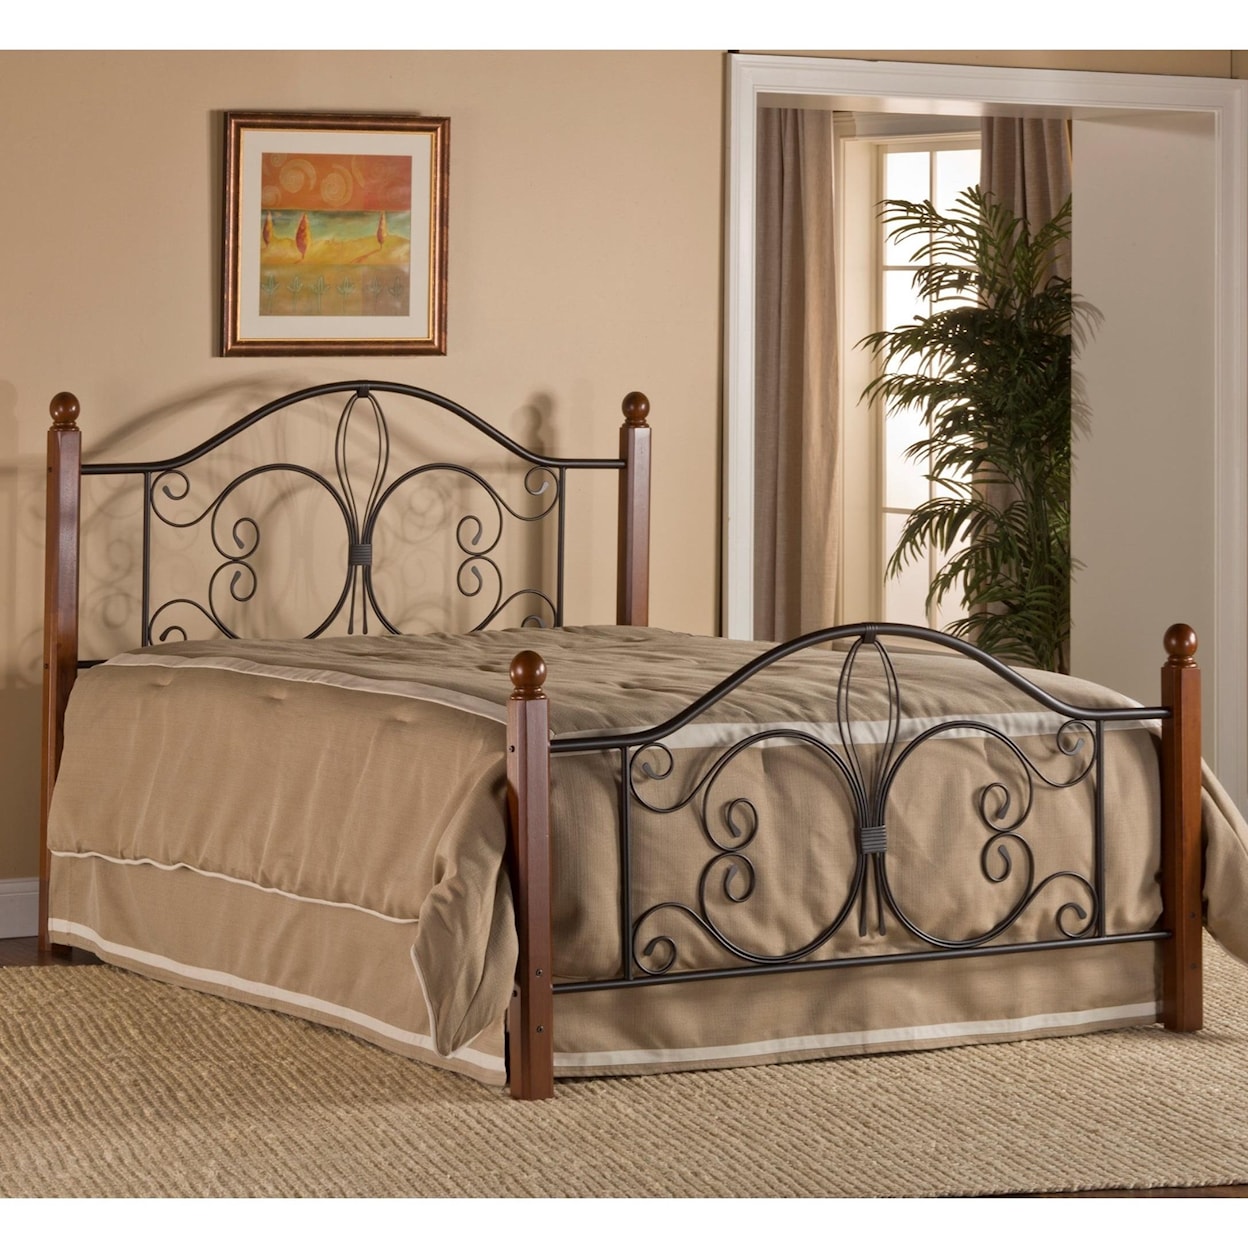 Hillsdale Metal Beds King Milwaukee Wood Post Bed